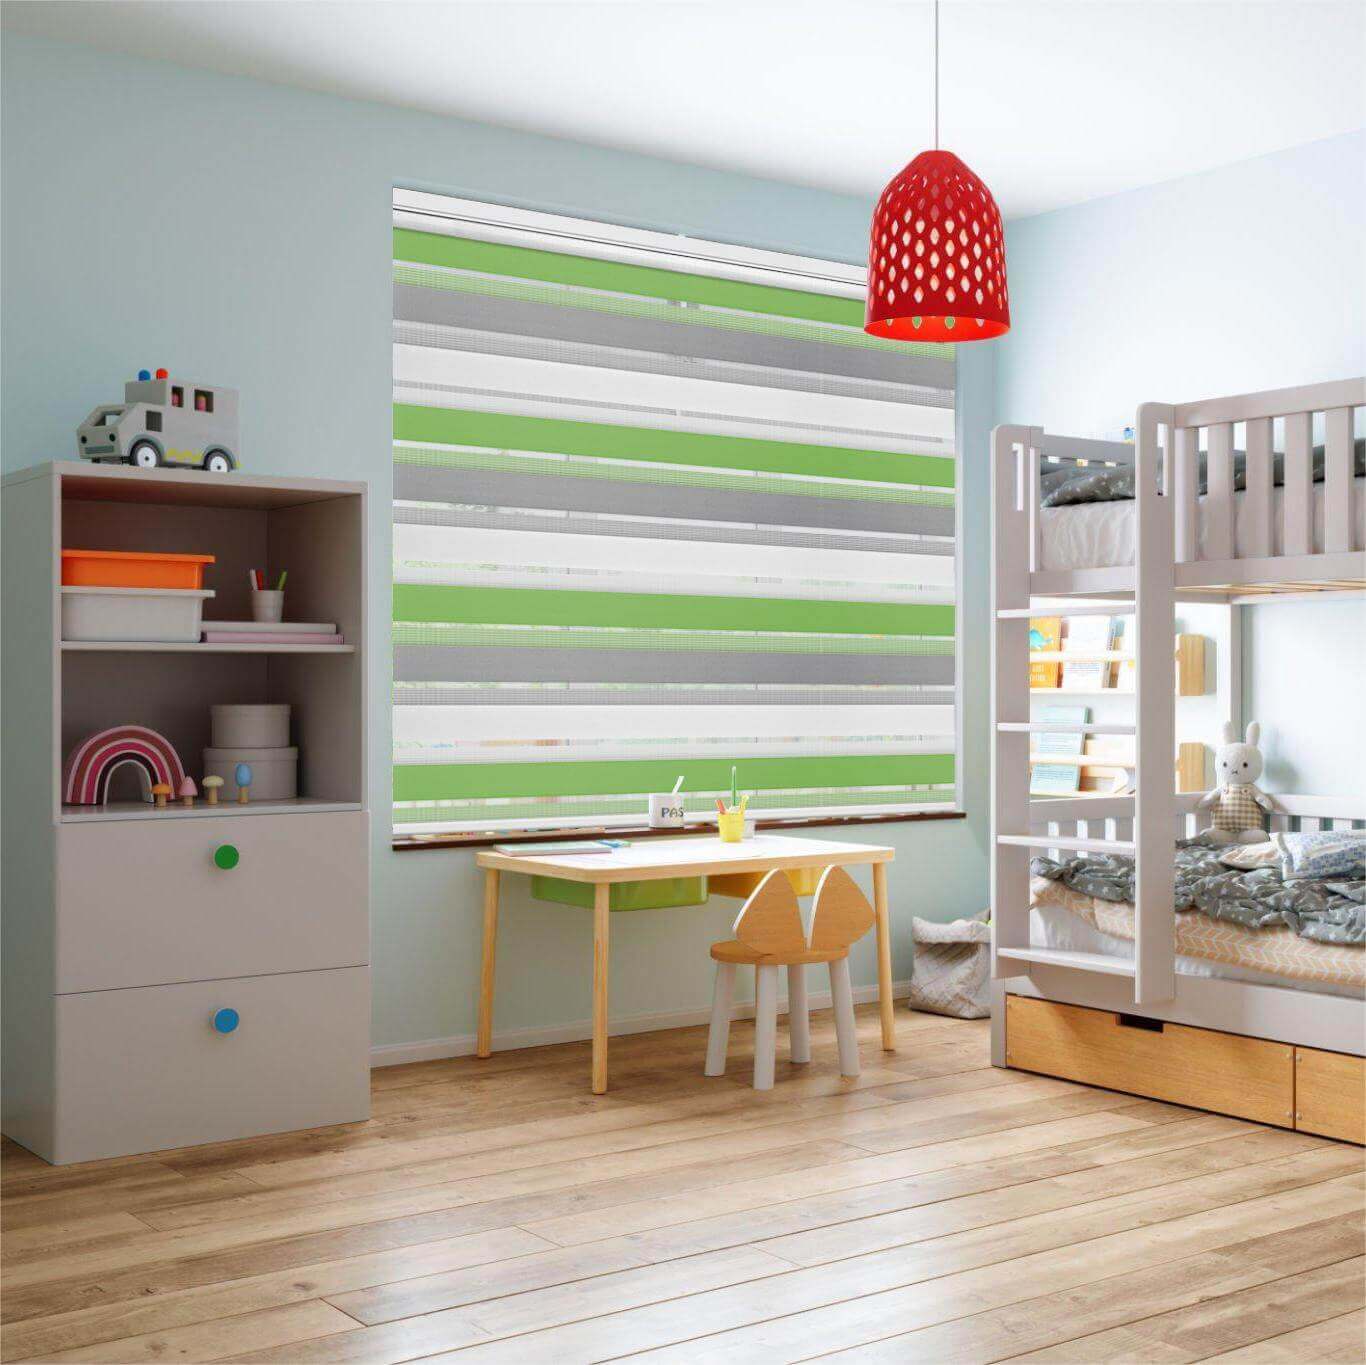 custom blinds and shades for kid room